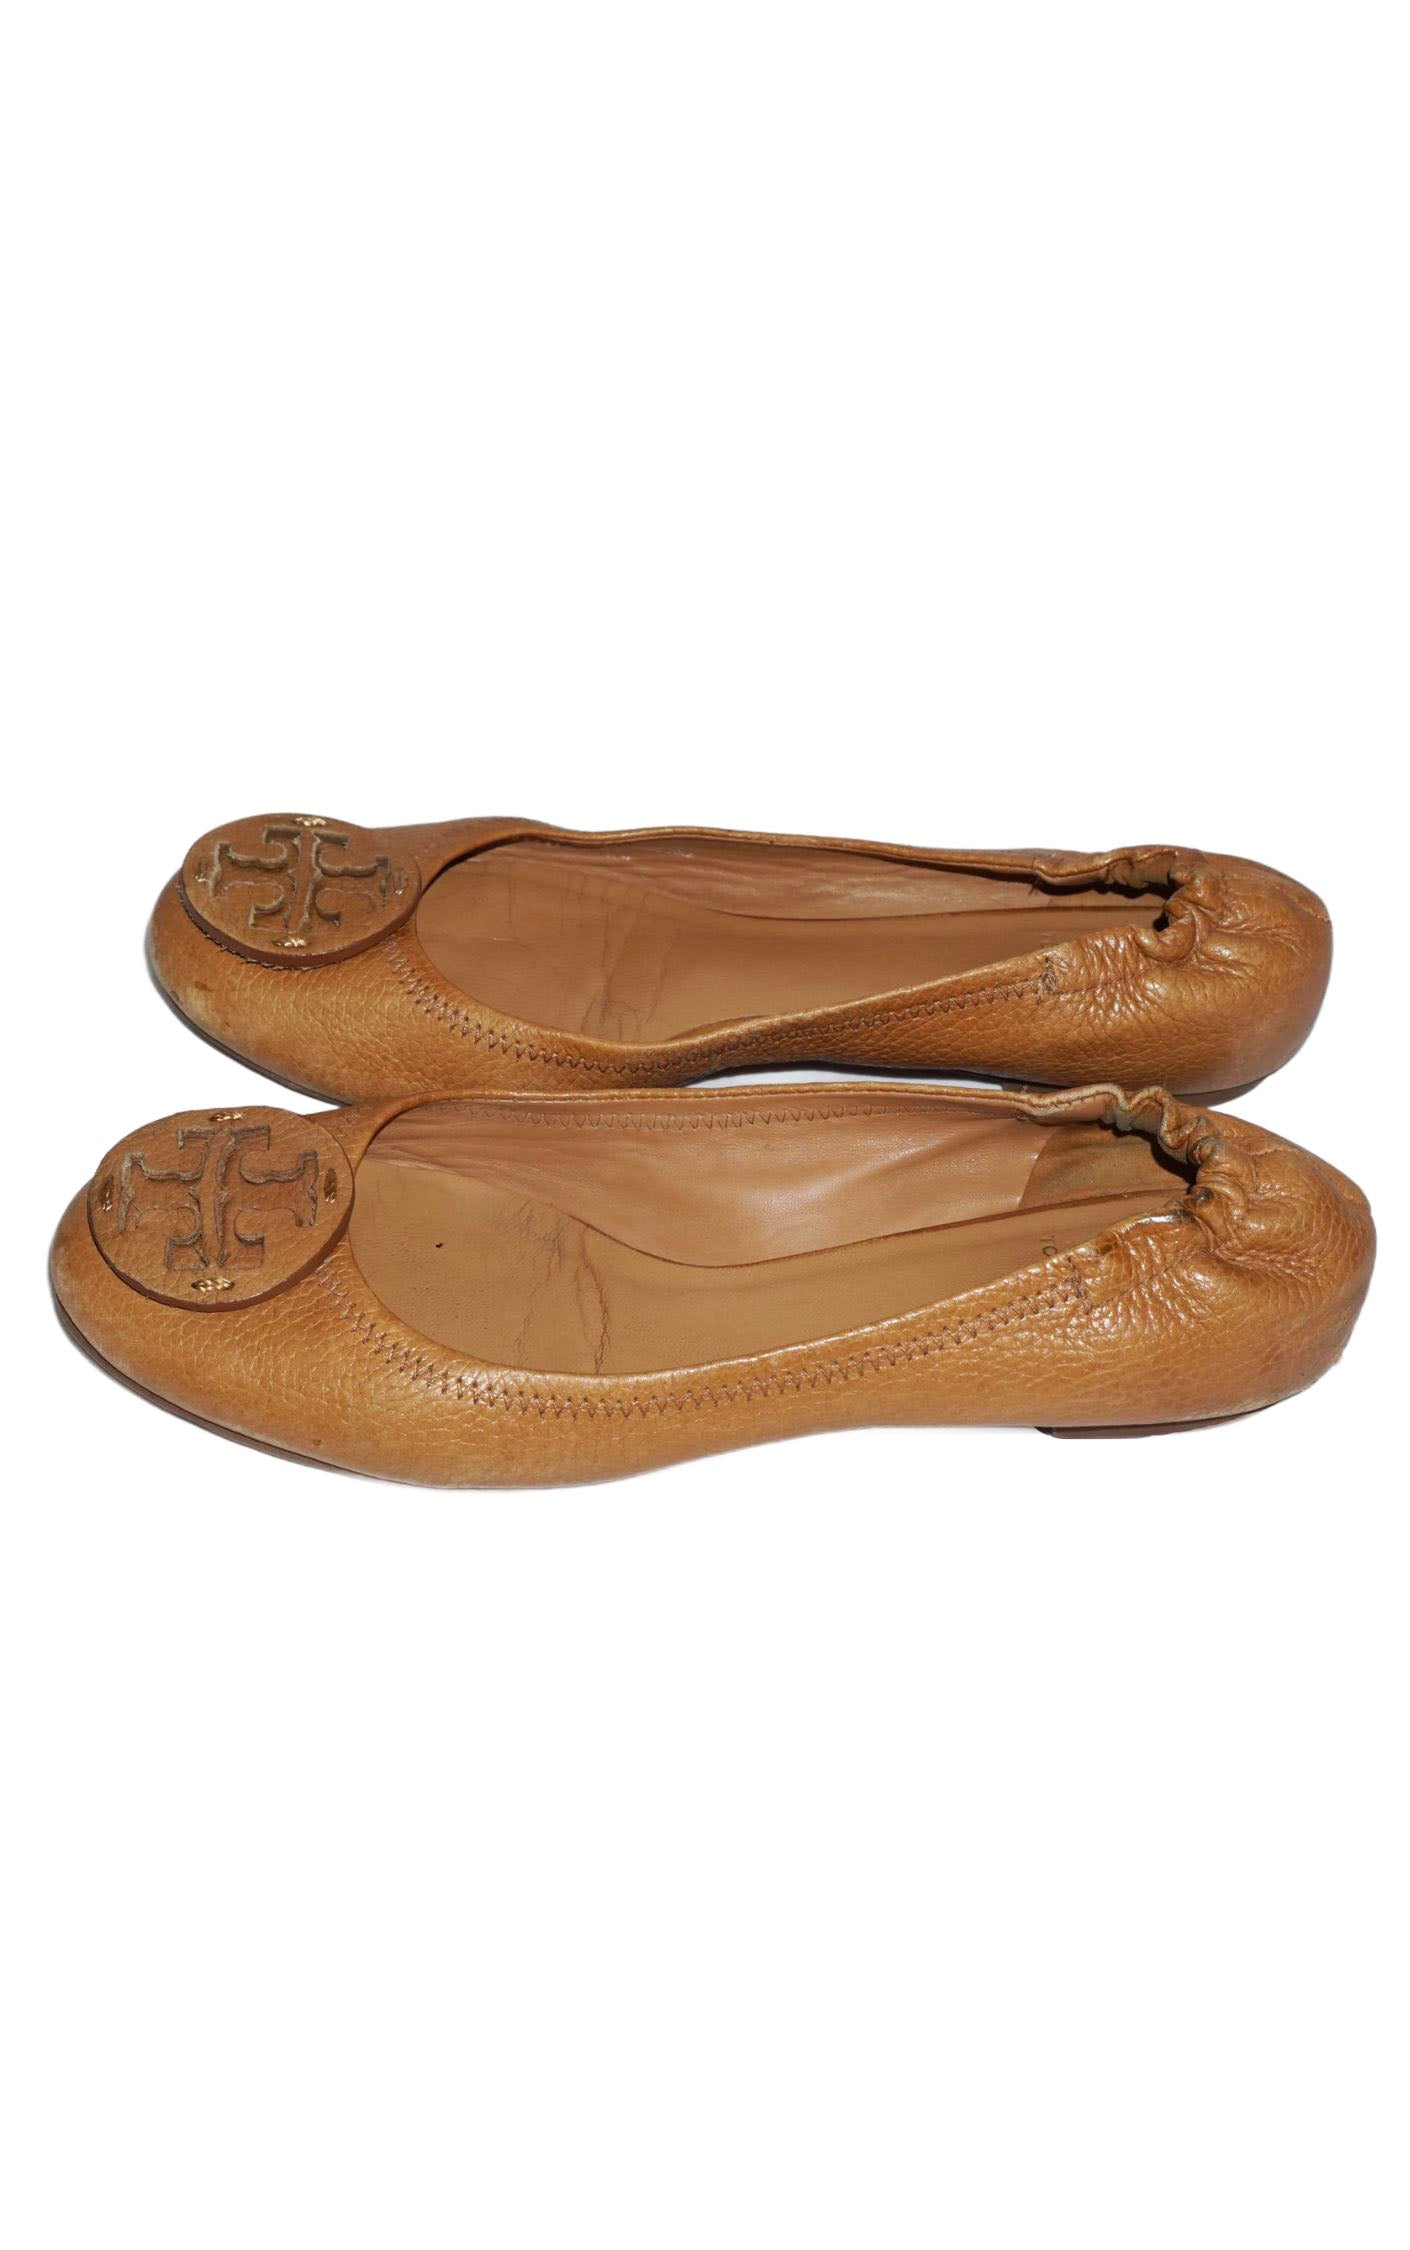 TORY BURCH Minnie Travel Brown Leather Ballet Flat Shoes resellum